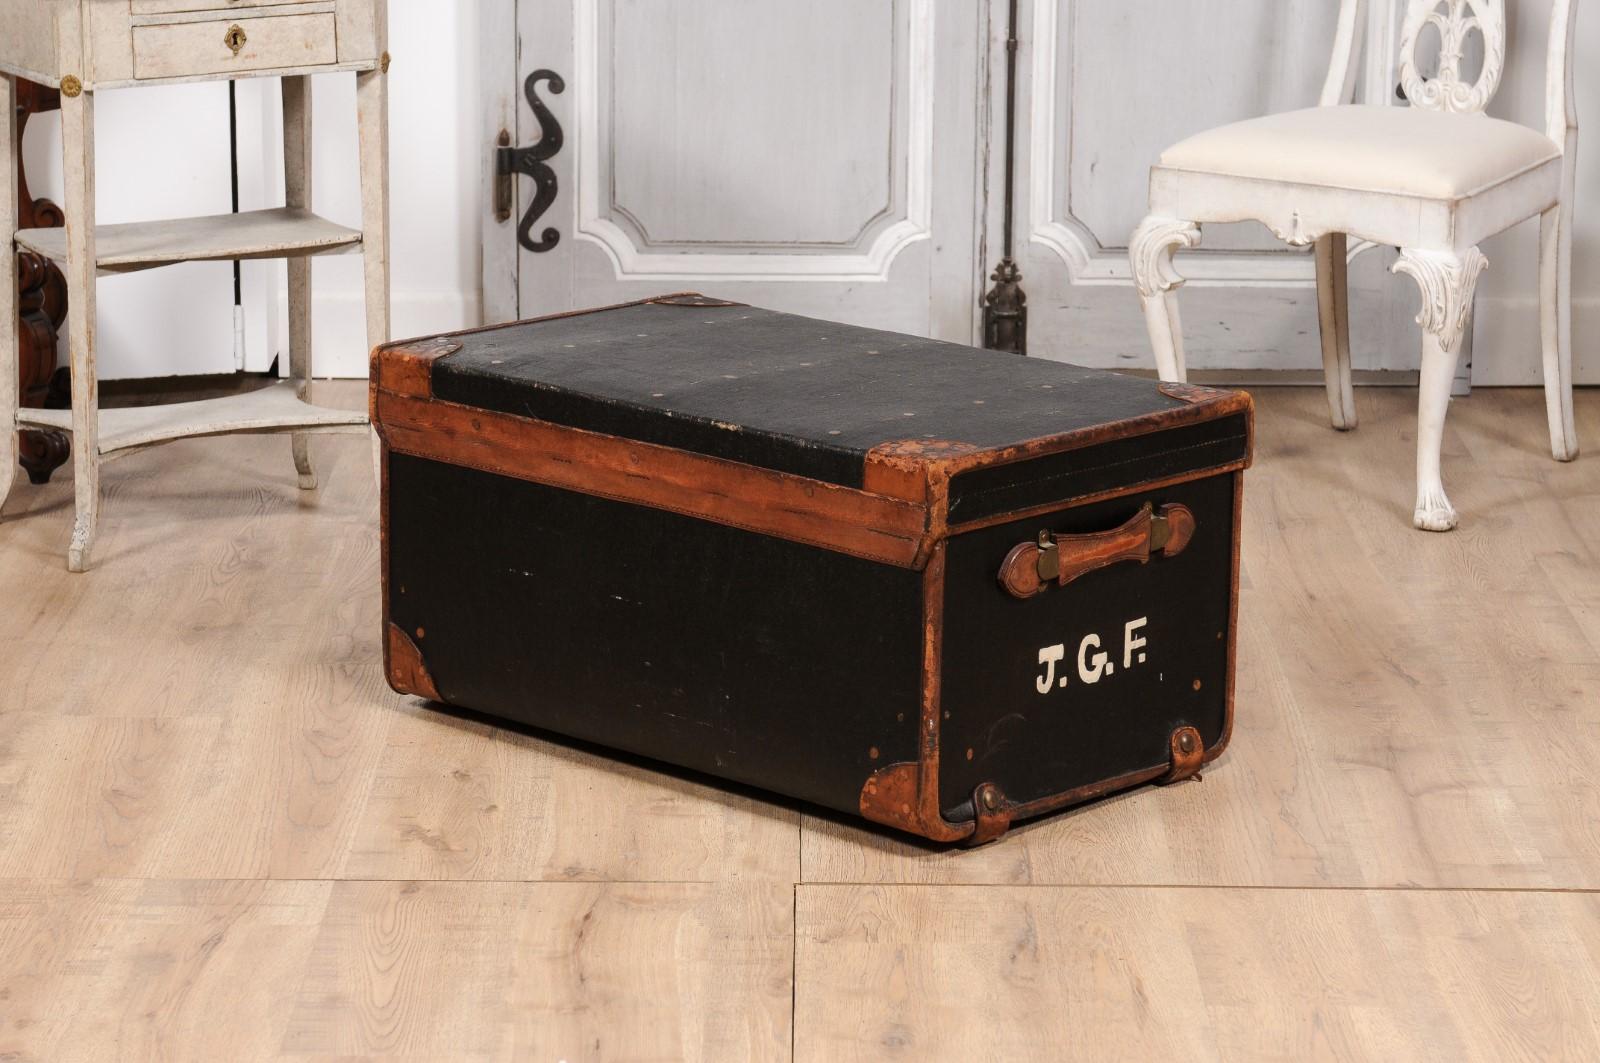 English Victorian Period 19th Century Black Traveling Trunk With Initials J.G.F. For Sale 5